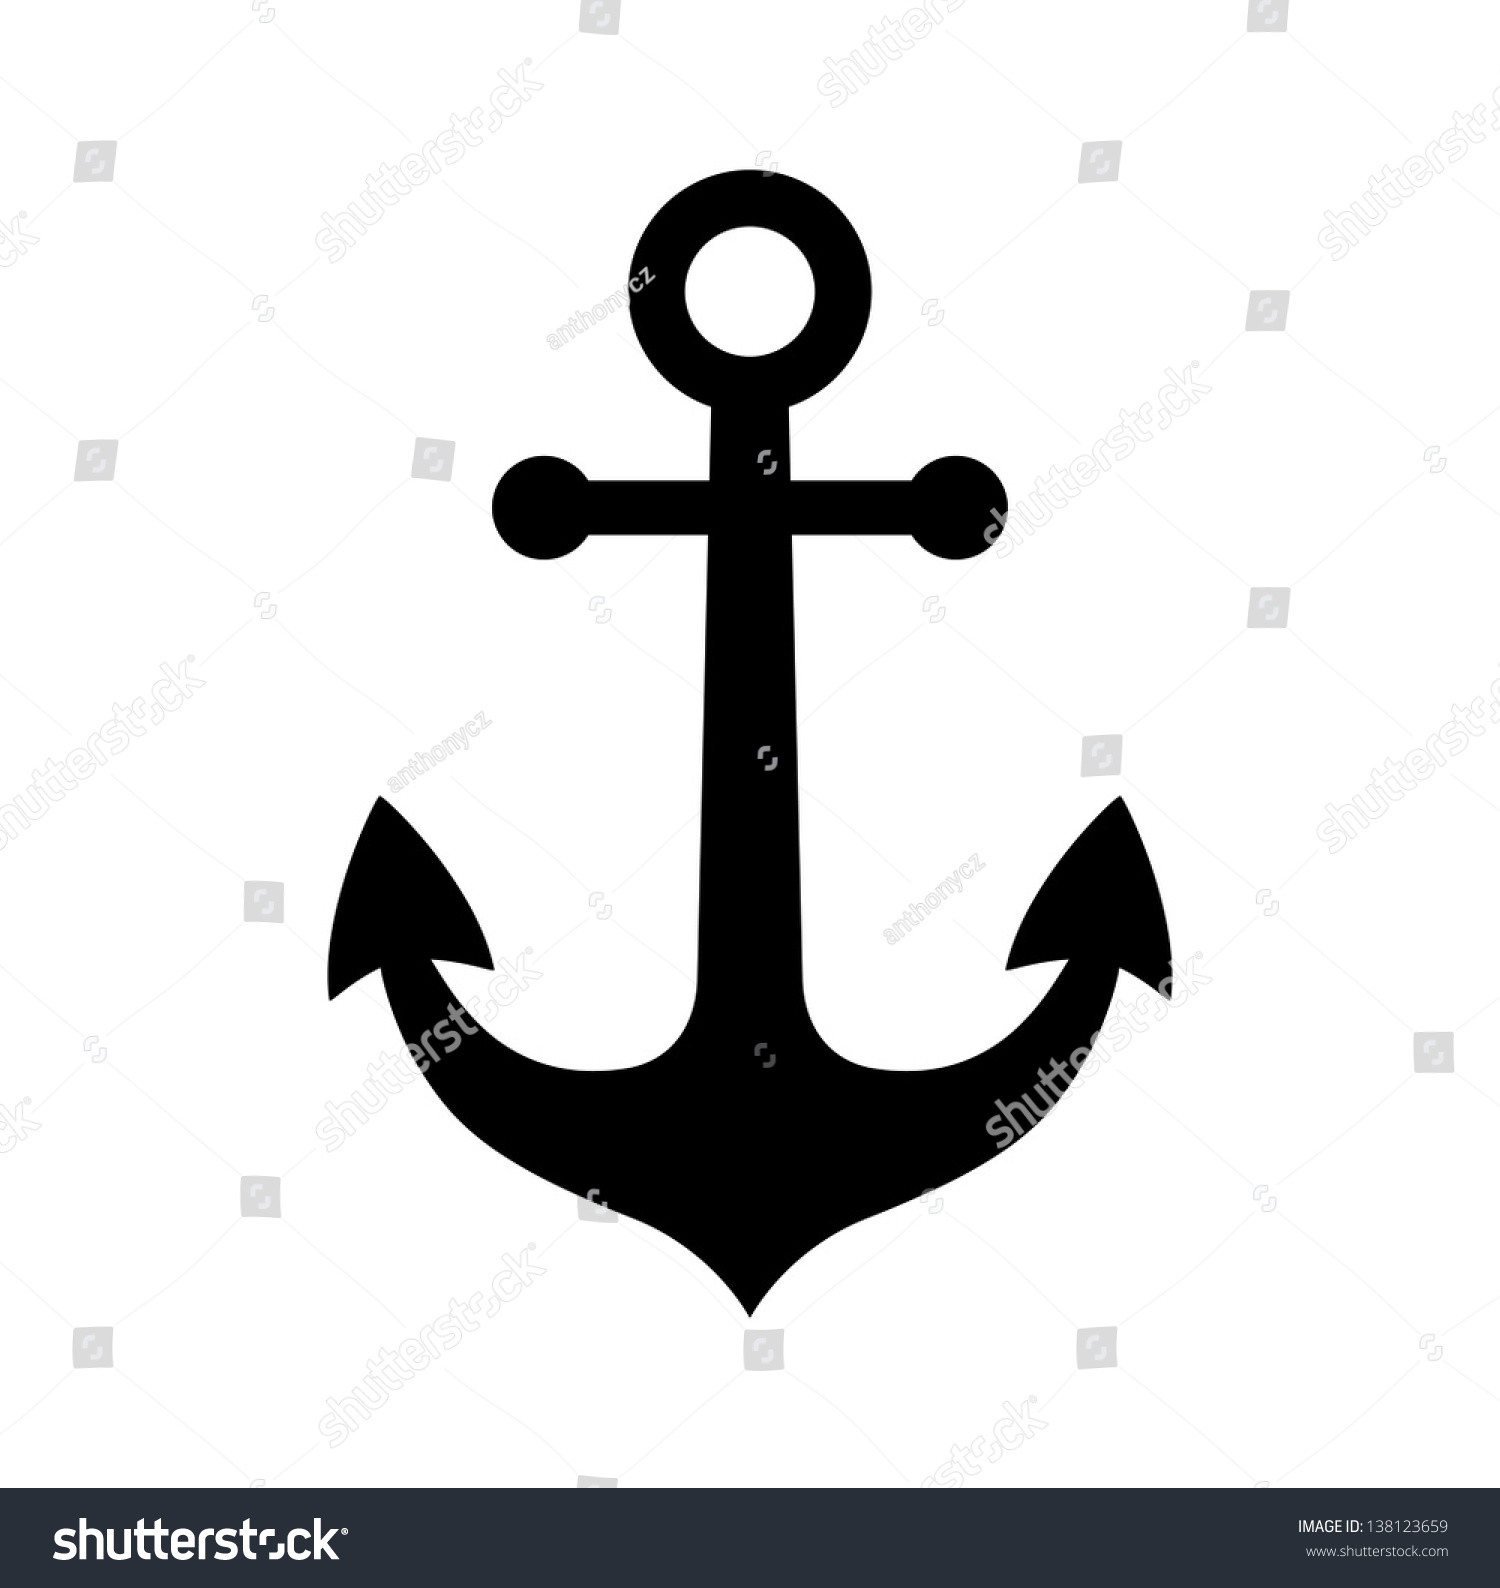 SVG of Anchor icon svg